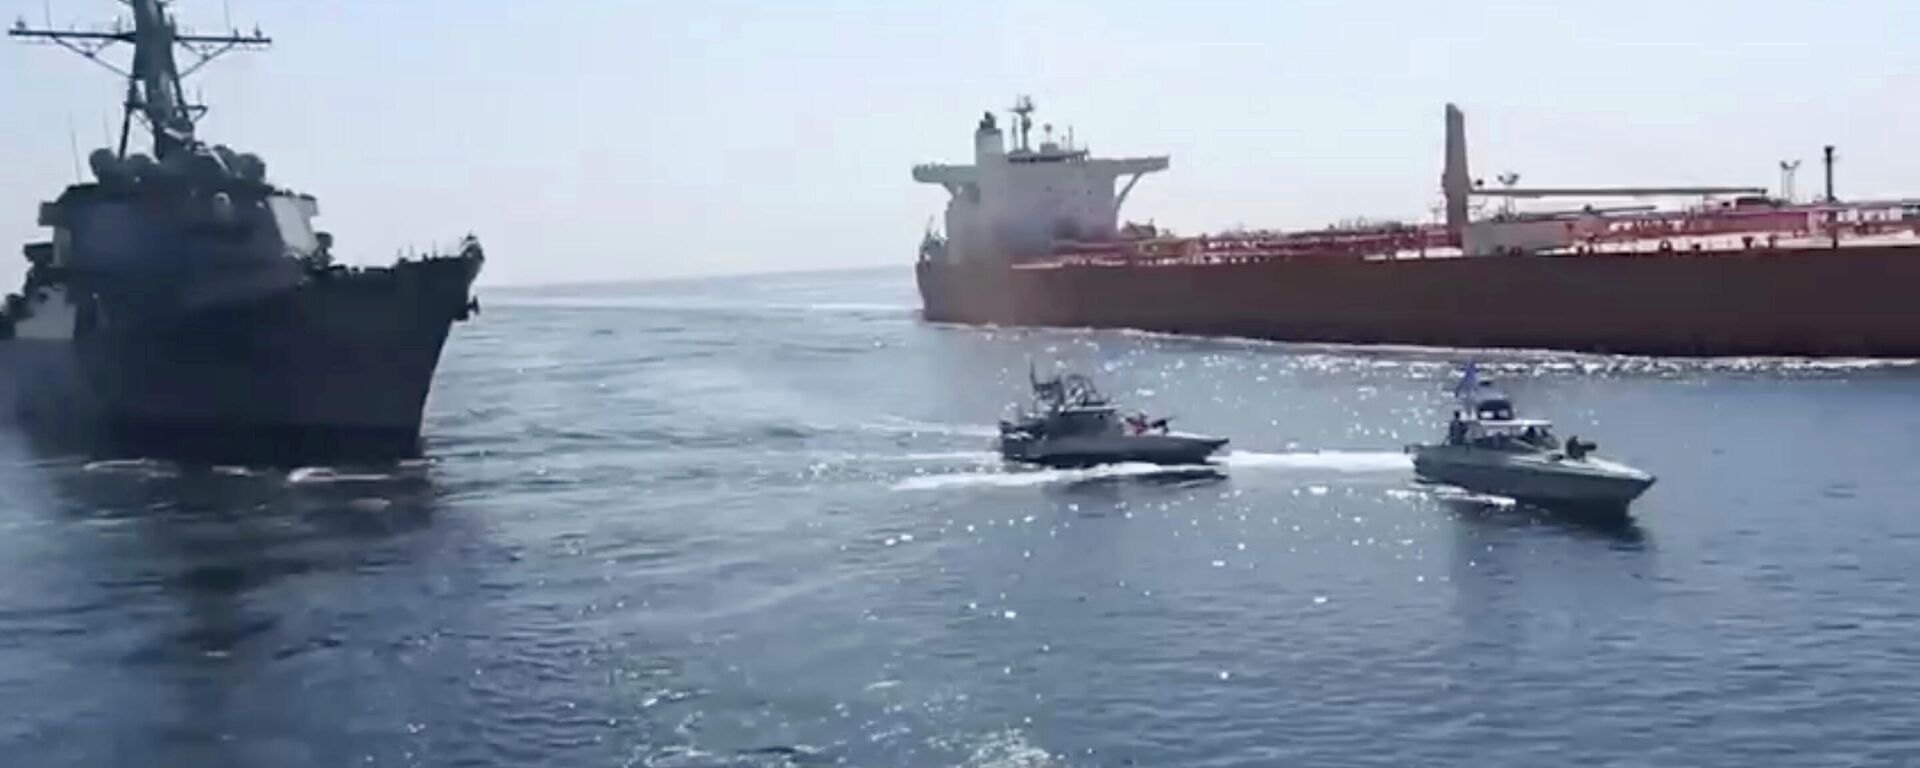 This frame grab from a video released by Iran's paramilitary Revolutionary Guard on Wednesday, Nov. 3, 2021, shows the Guard speed boats, center, in front of a U.S warship, left, amid the seizure of a Vietnamese-flagged oil tanker, right, in the Gulf of Oman. Iran seized the tanker in the Gulf of Oman last month and still holds the vessel, two U.S. officials told The Associated Press on Wednesday, revealing the latest provocation in Mideast waters as tensions escalate between Iran and the United States over Tehran's nuclear program. (Revolutionary Guard via AP) - Sputnik International, 1920, 04.11.2021